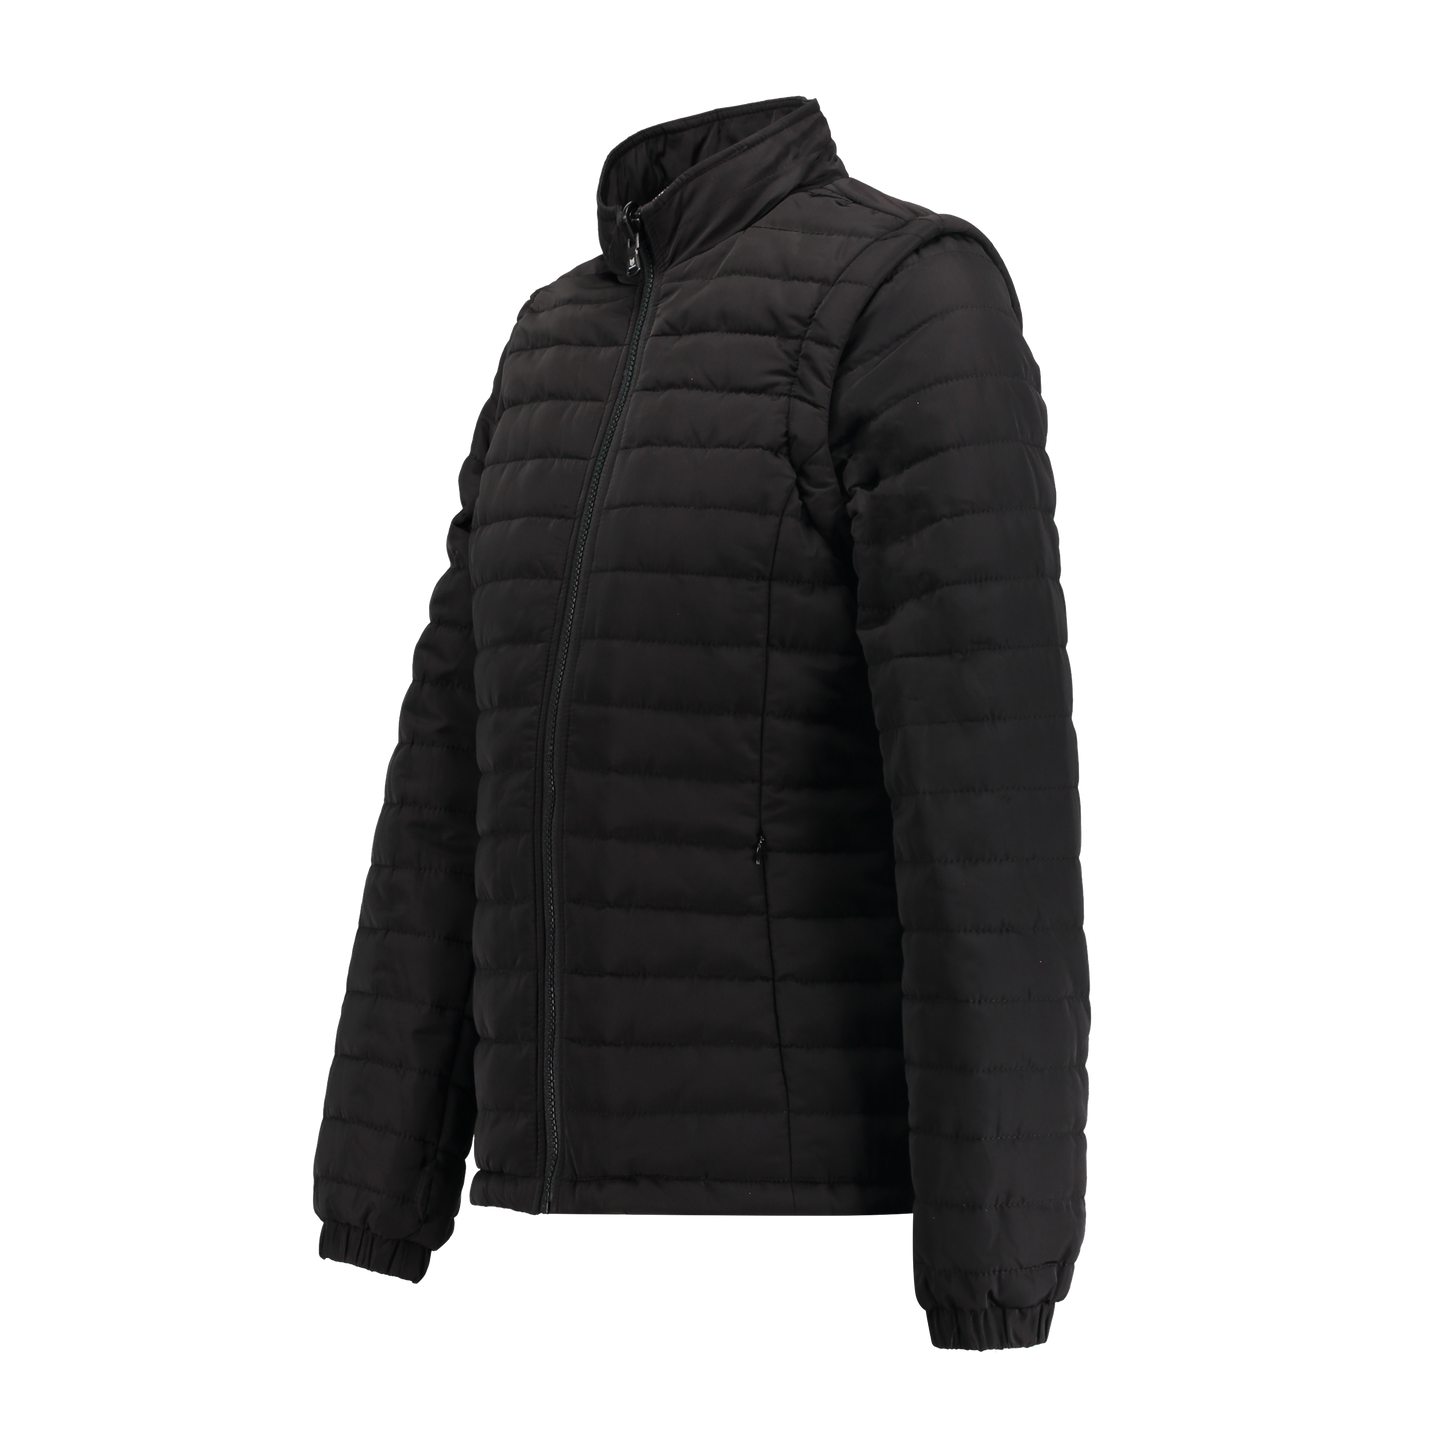 Sierra Black Puffer Jacket Removable Arms